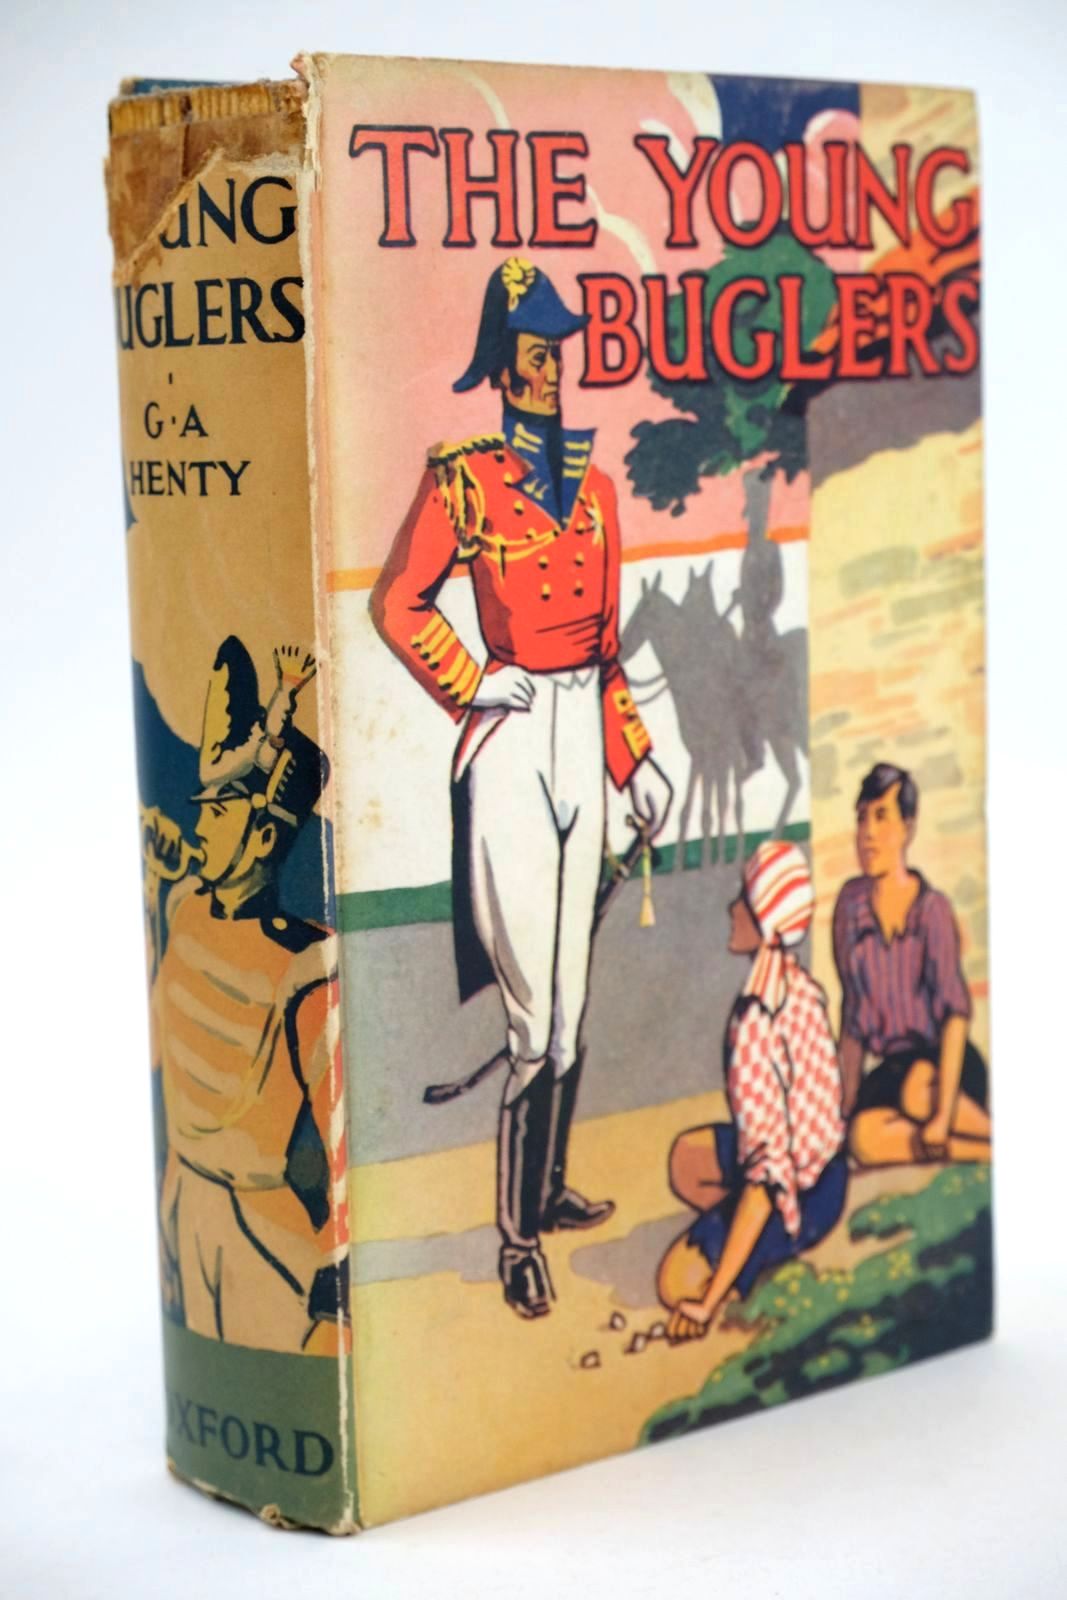 Photo of THE YOUNG BUGLERS written by Henty, G.A. published by Oxford University Press, Humphrey Milford (STOCK CODE: 1325223)  for sale by Stella & Rose's Books